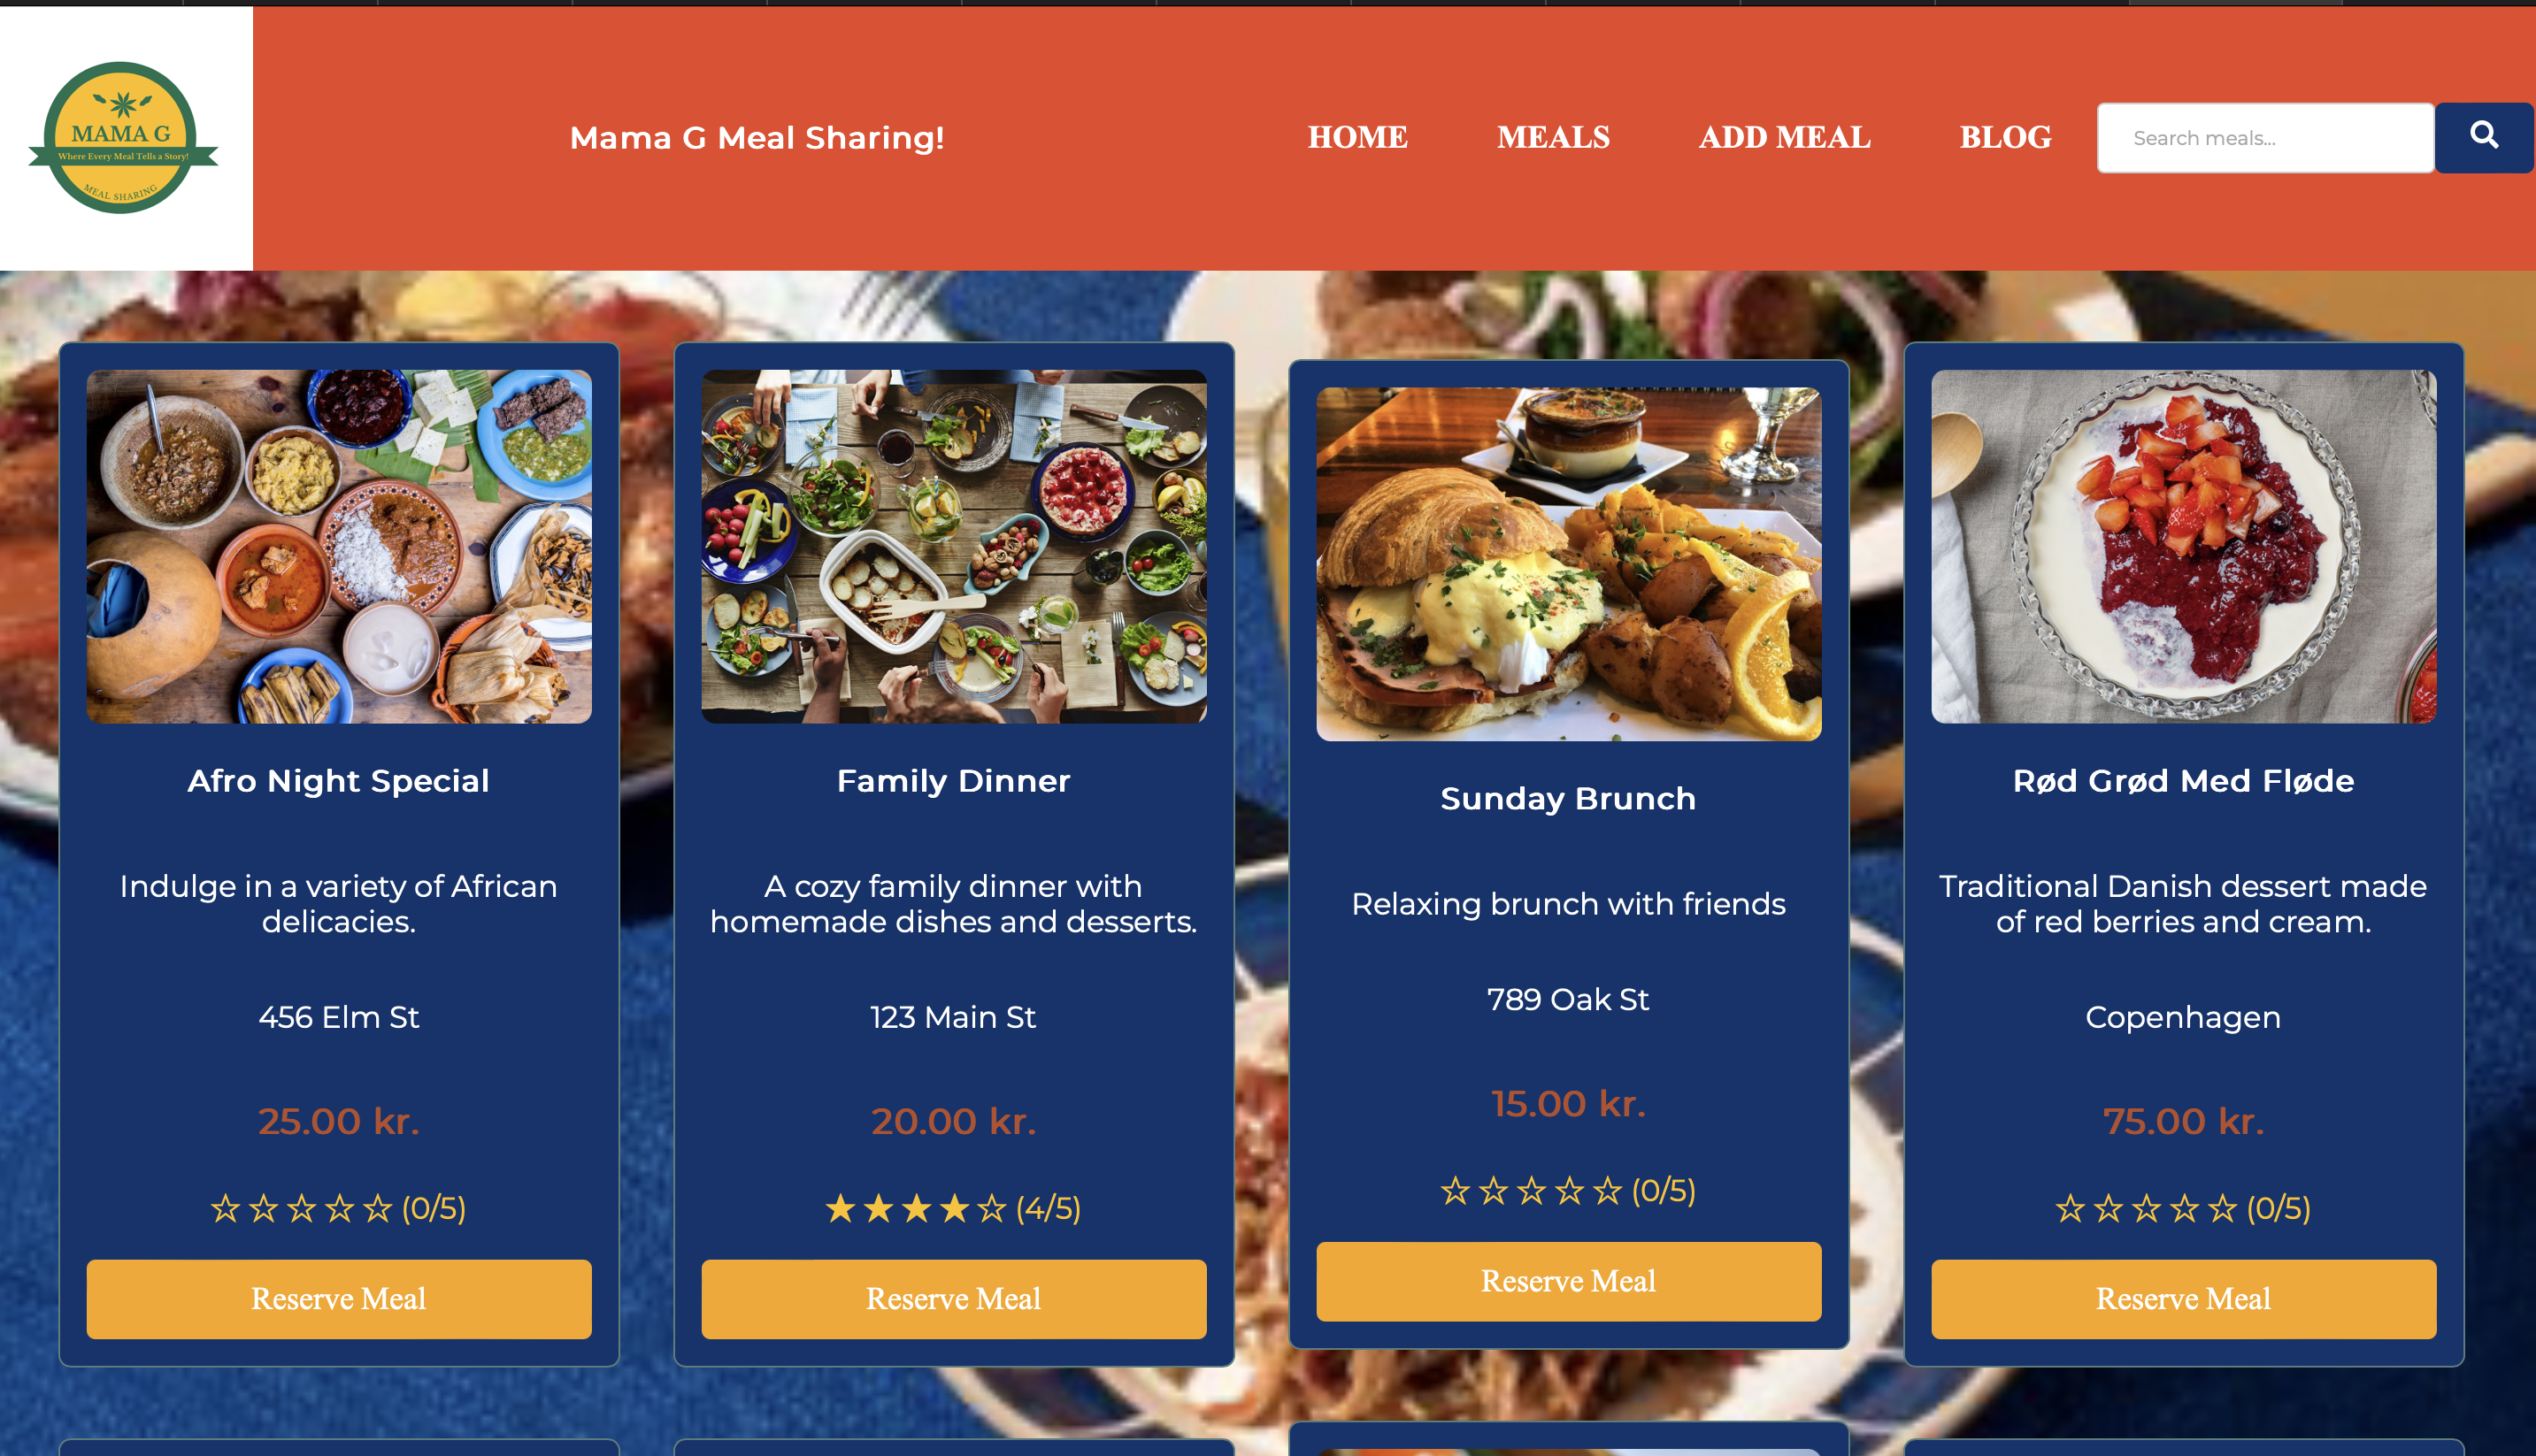 Meal Page